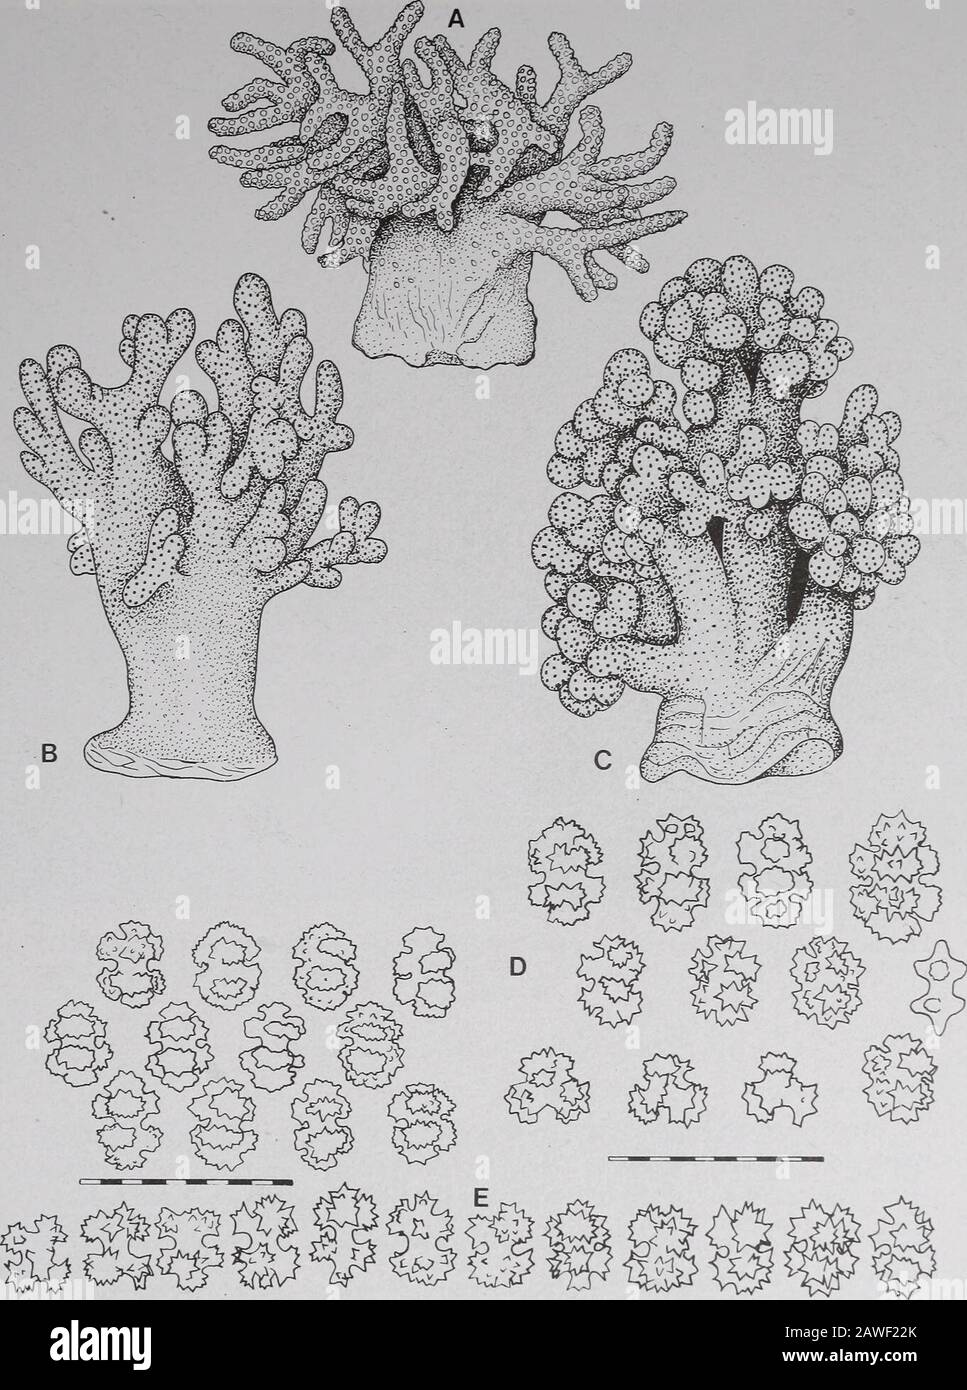 Annals of the South African MuseumAnnale van die Suid-Afrikaanse Museum . ; retracted polypsoften form small rounded protuberances on the surface of the polyparium,expanded polyps mostly 0,5 mm in length and diameter preserved. Polypswithout conspicuous or permanent calyces but may form hemispherical pro-trusions on the surface of the polyparium when retracted. These protuberancesare capable of retraction into the polyparium. Sclerites from surface of lobes arepredominantly compact eight-radiates (capstans), 0,040-0,065 mm in length,with angular or thorny tubercles. A few sclerites are triradi Stock Photo